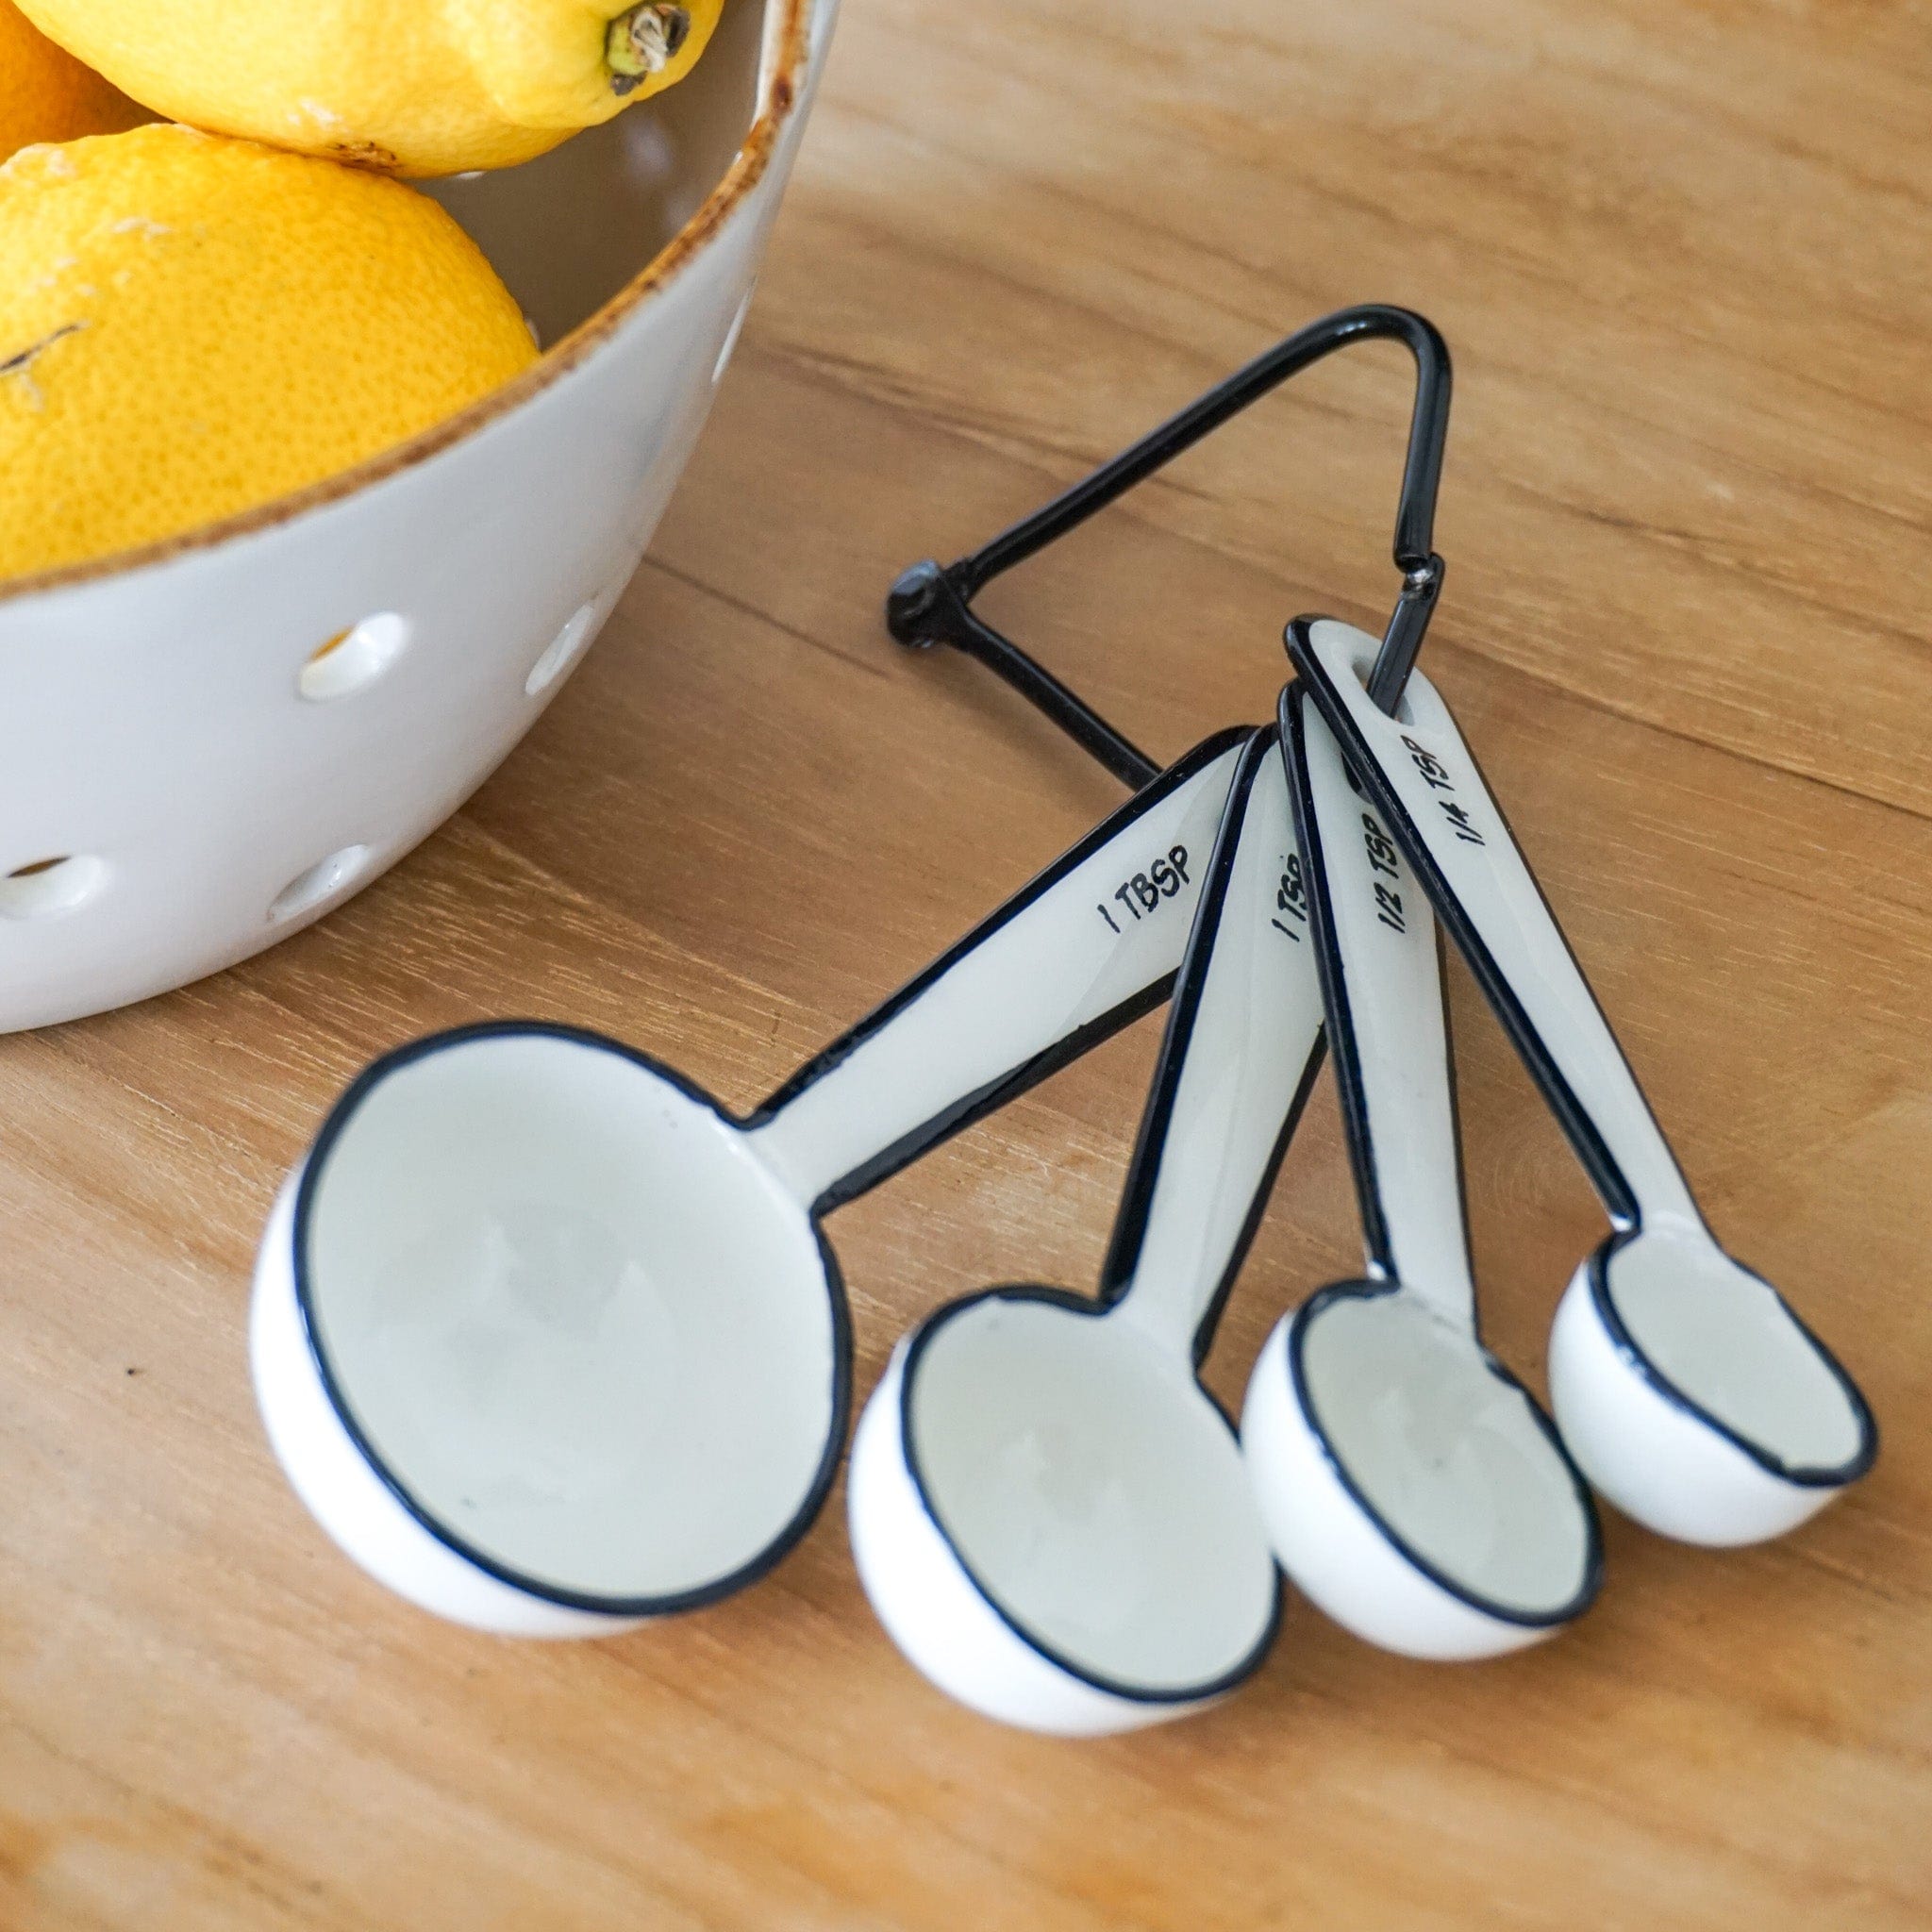 BE HOME Kitchen & Dining Enamel Measuring Spoons